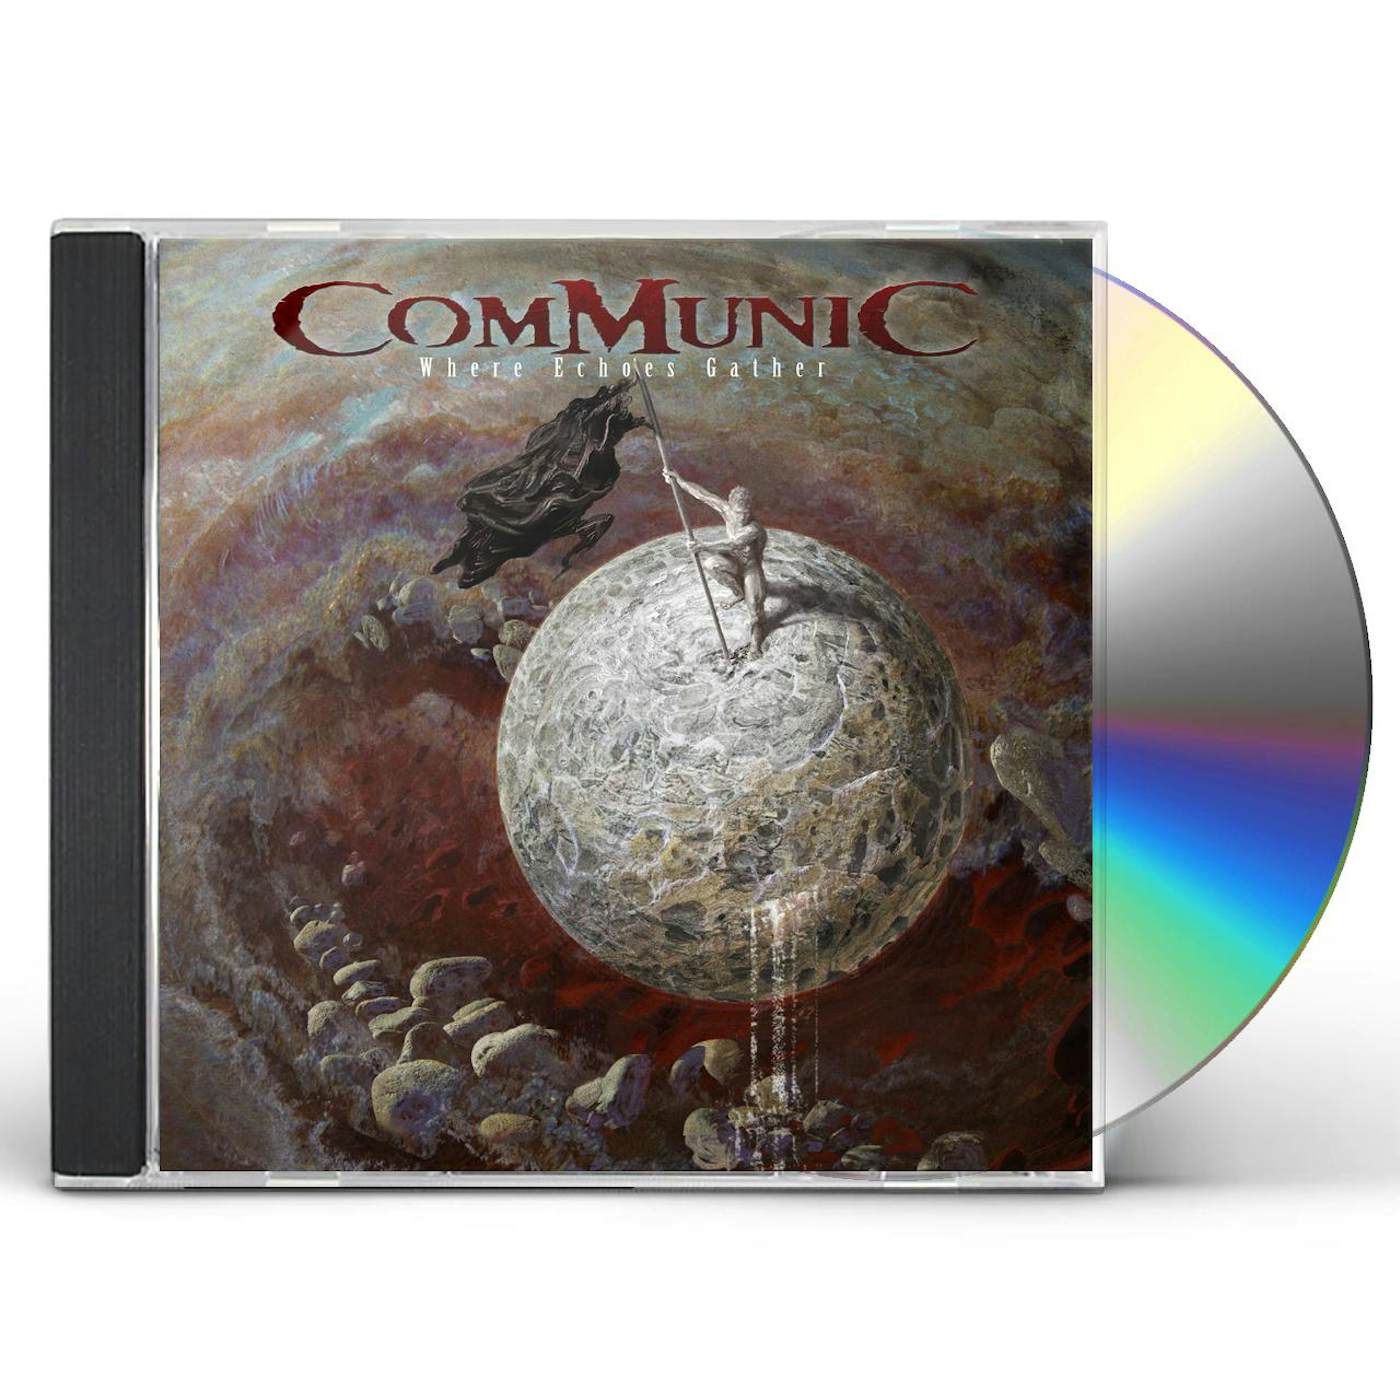 Communic WHERE ECHOES GATHER CD